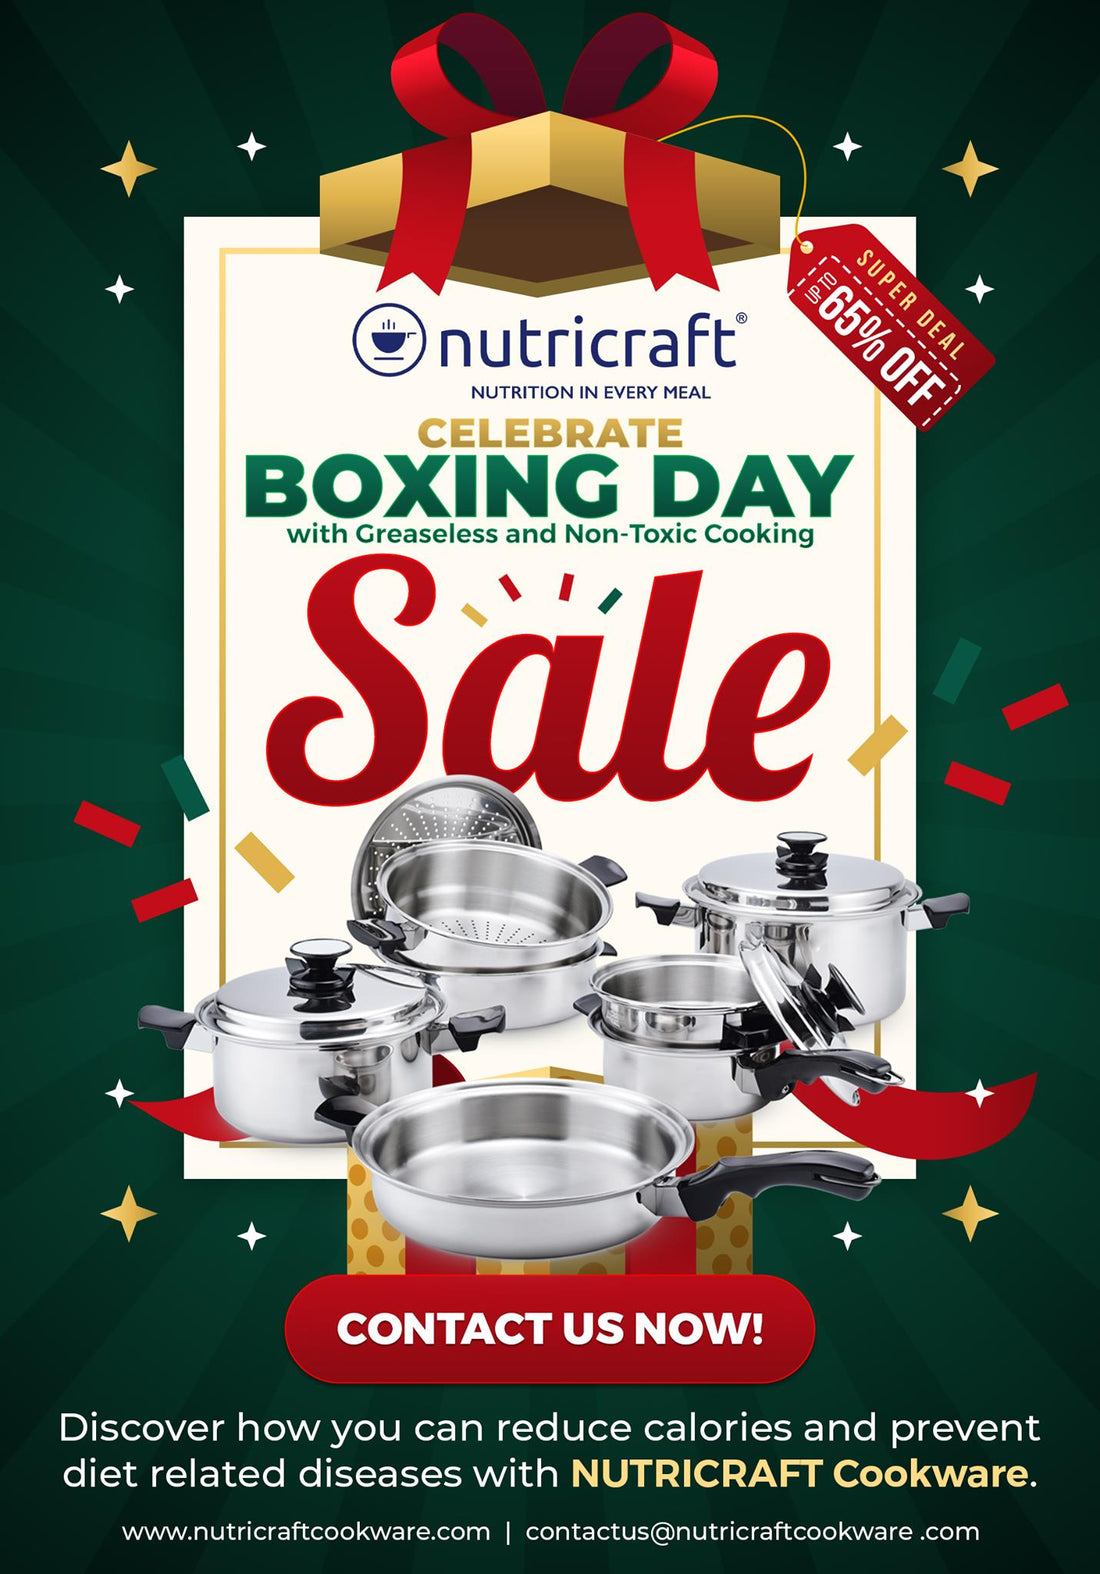 Celebrate Boxing Day with Greaseless and Non-Toxic Cooking